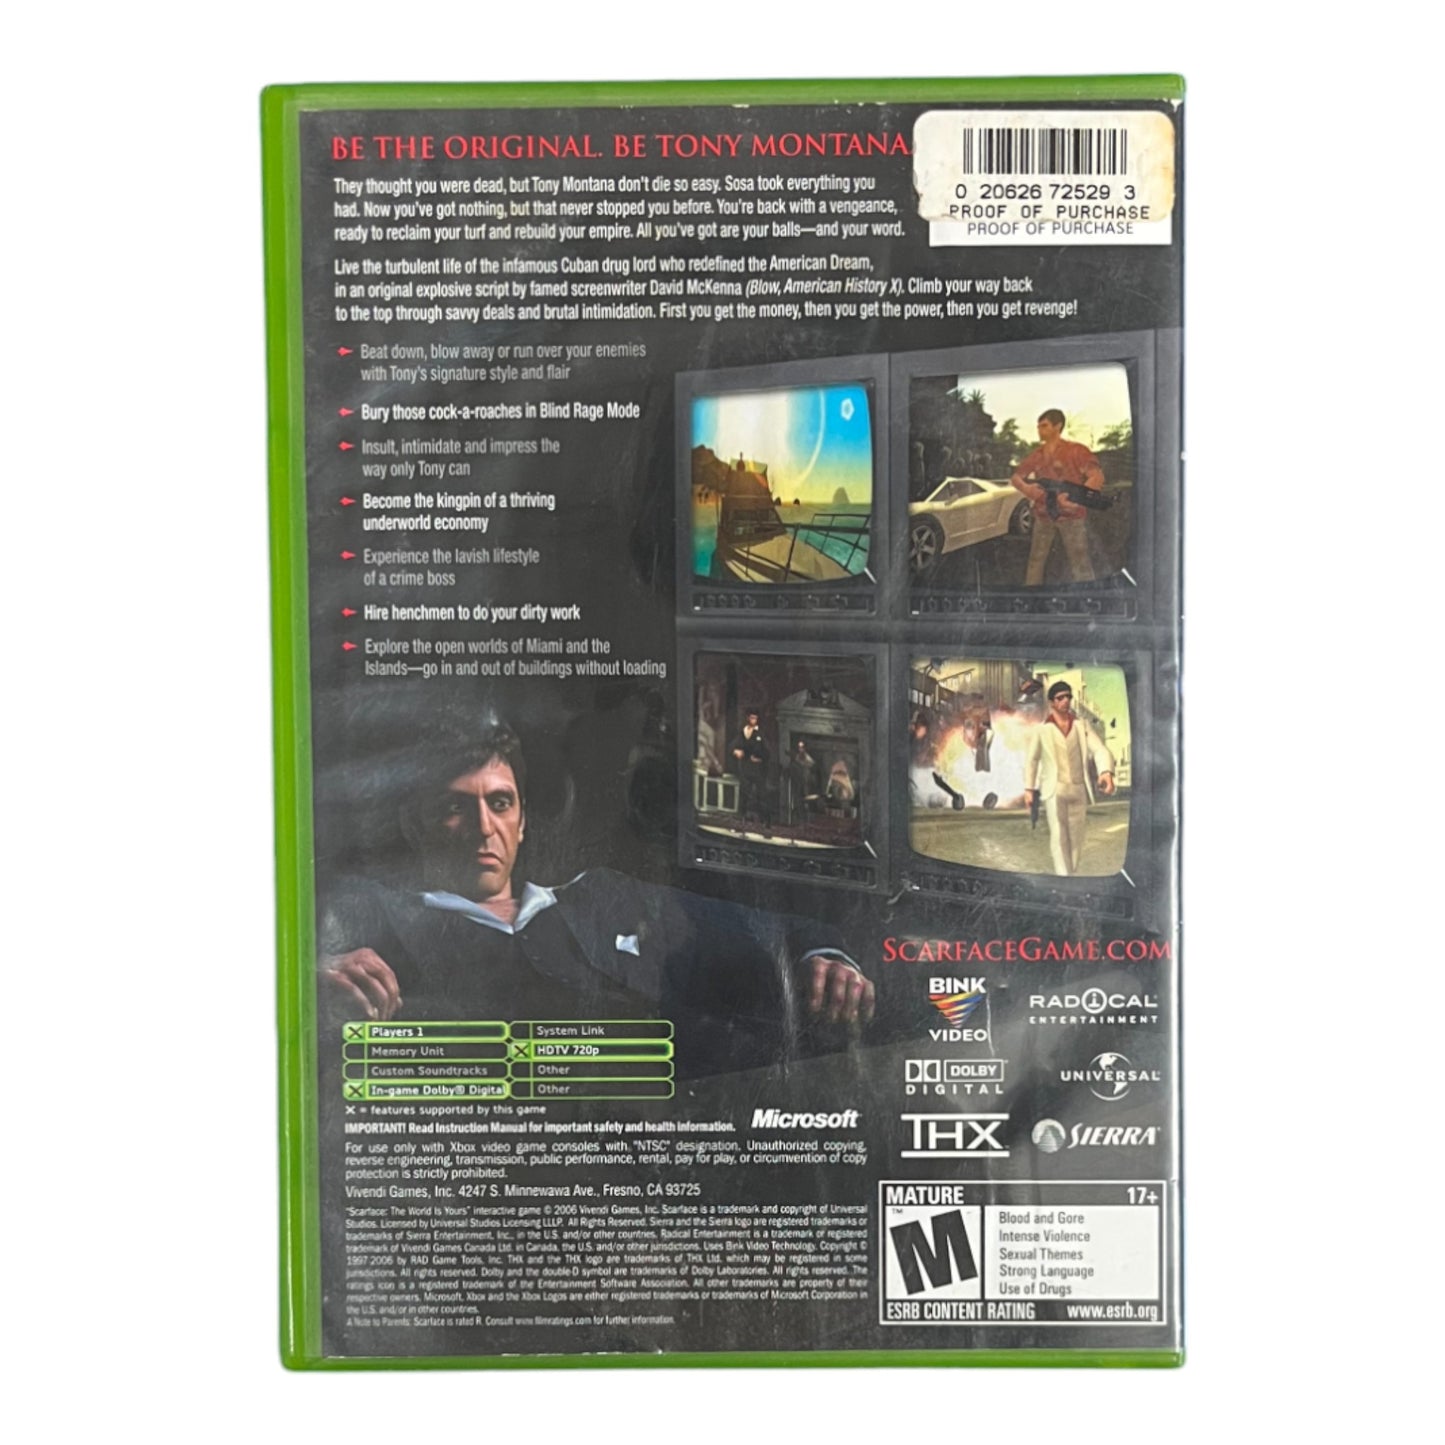 Scarface The World Is Yours (Xbox)